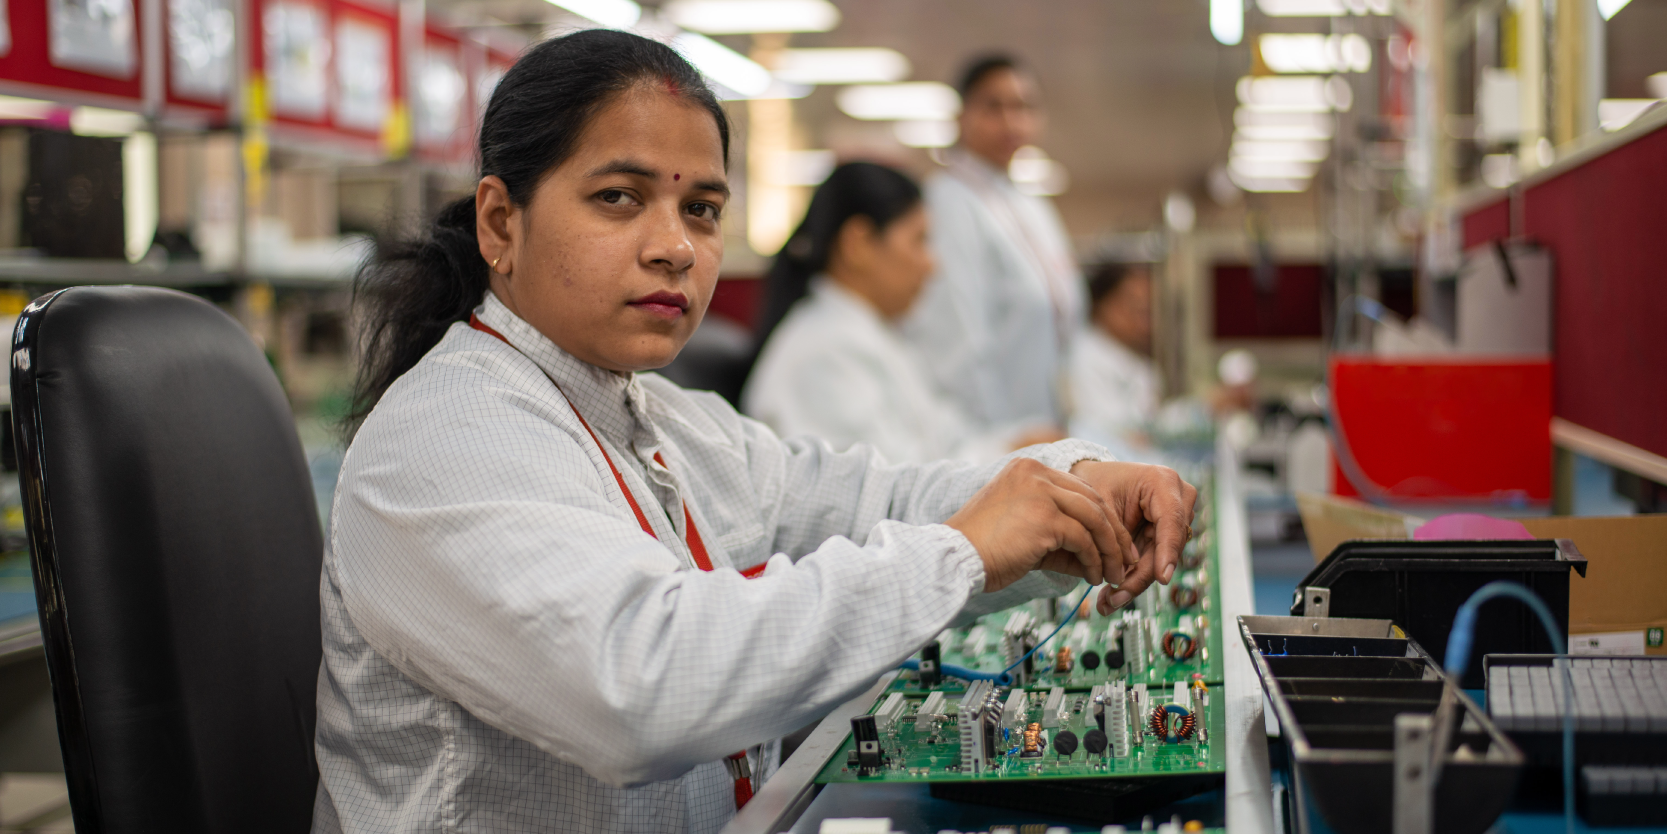 India's ascent: A multi-pronged strategy for global leadership in electronics manufacturing